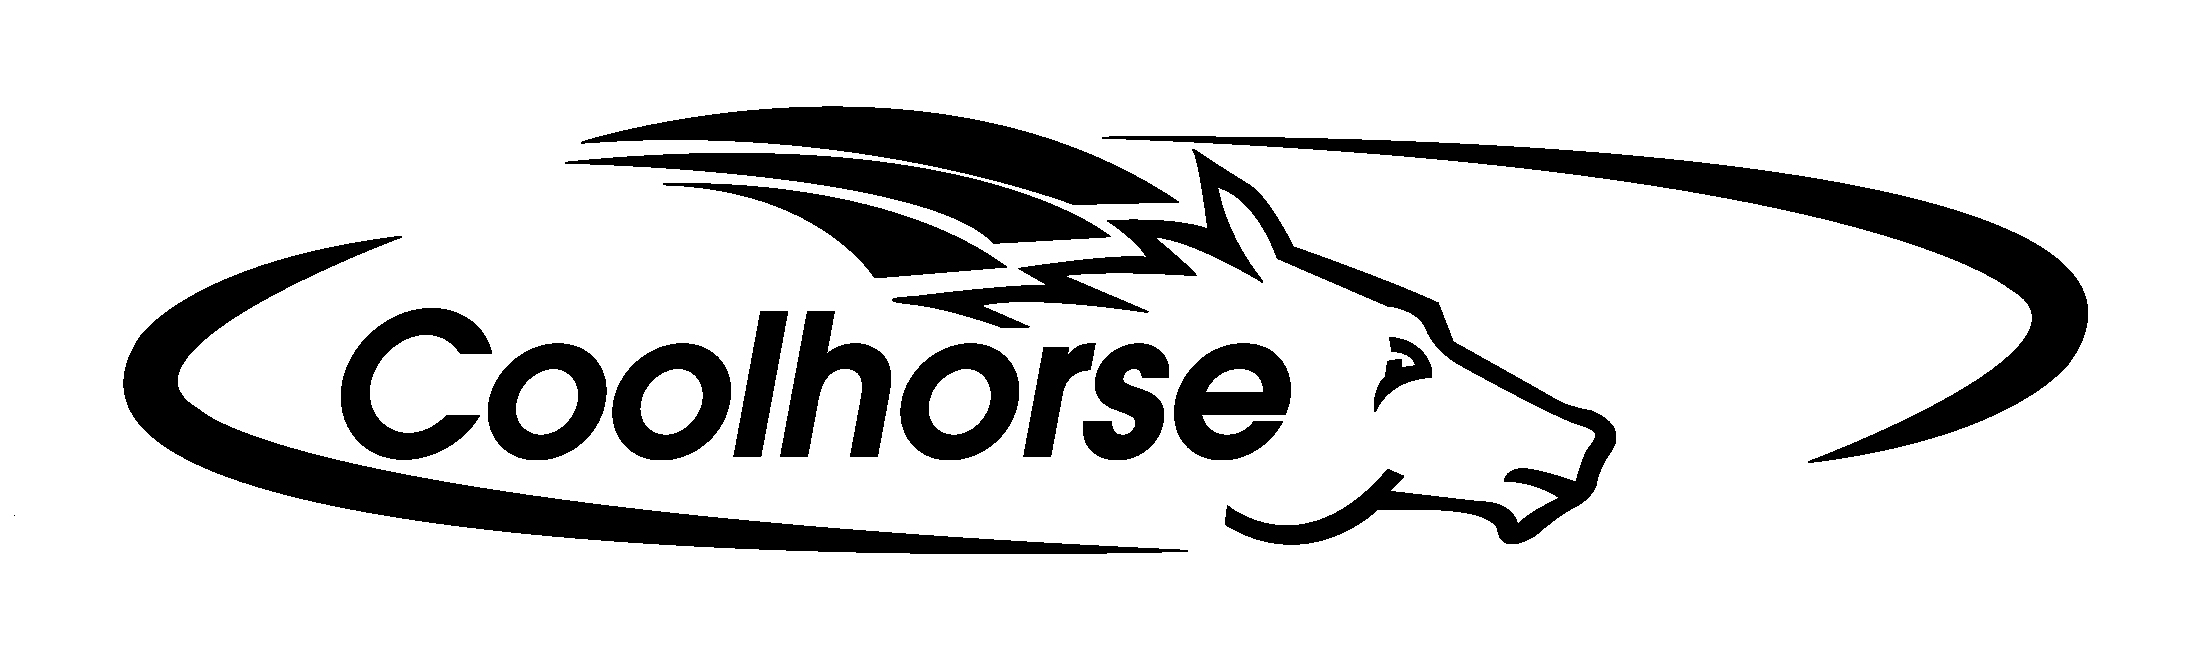 Coolhorse Acquires Champion's Choice Buckles - Champion's Choice Silver ...